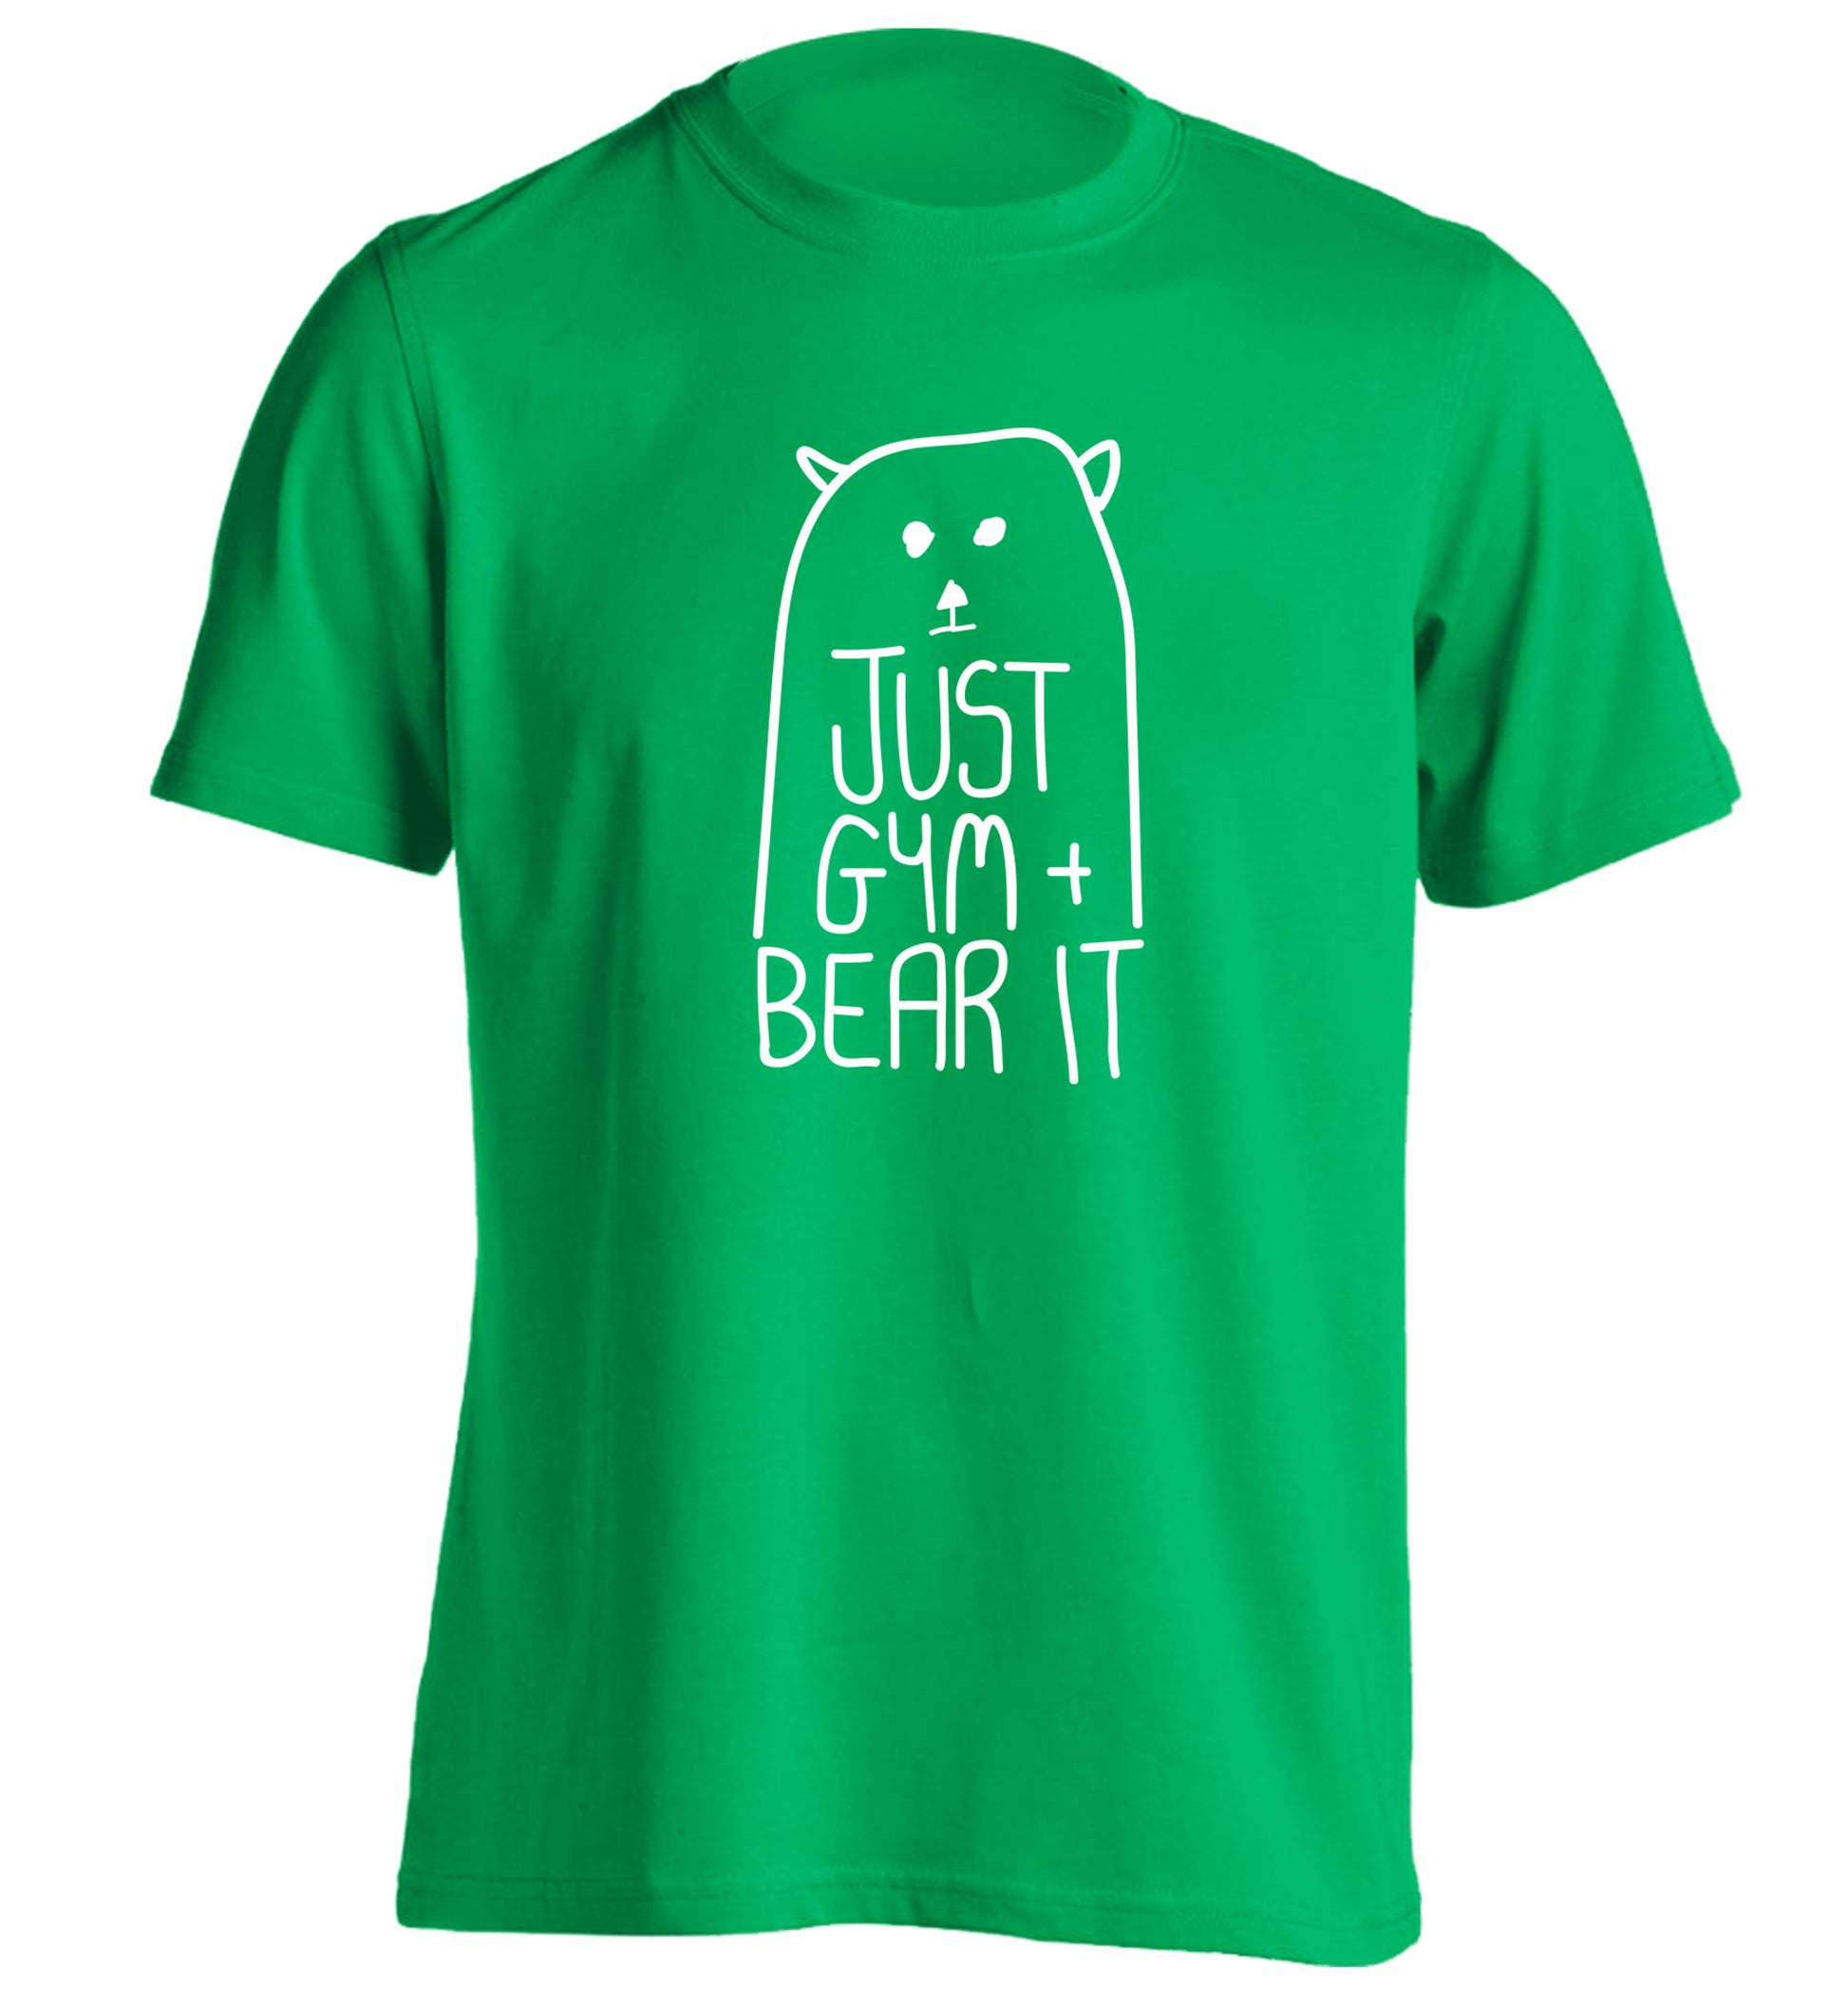 Just gym and bear it adults unisex green Tshirt 2XL